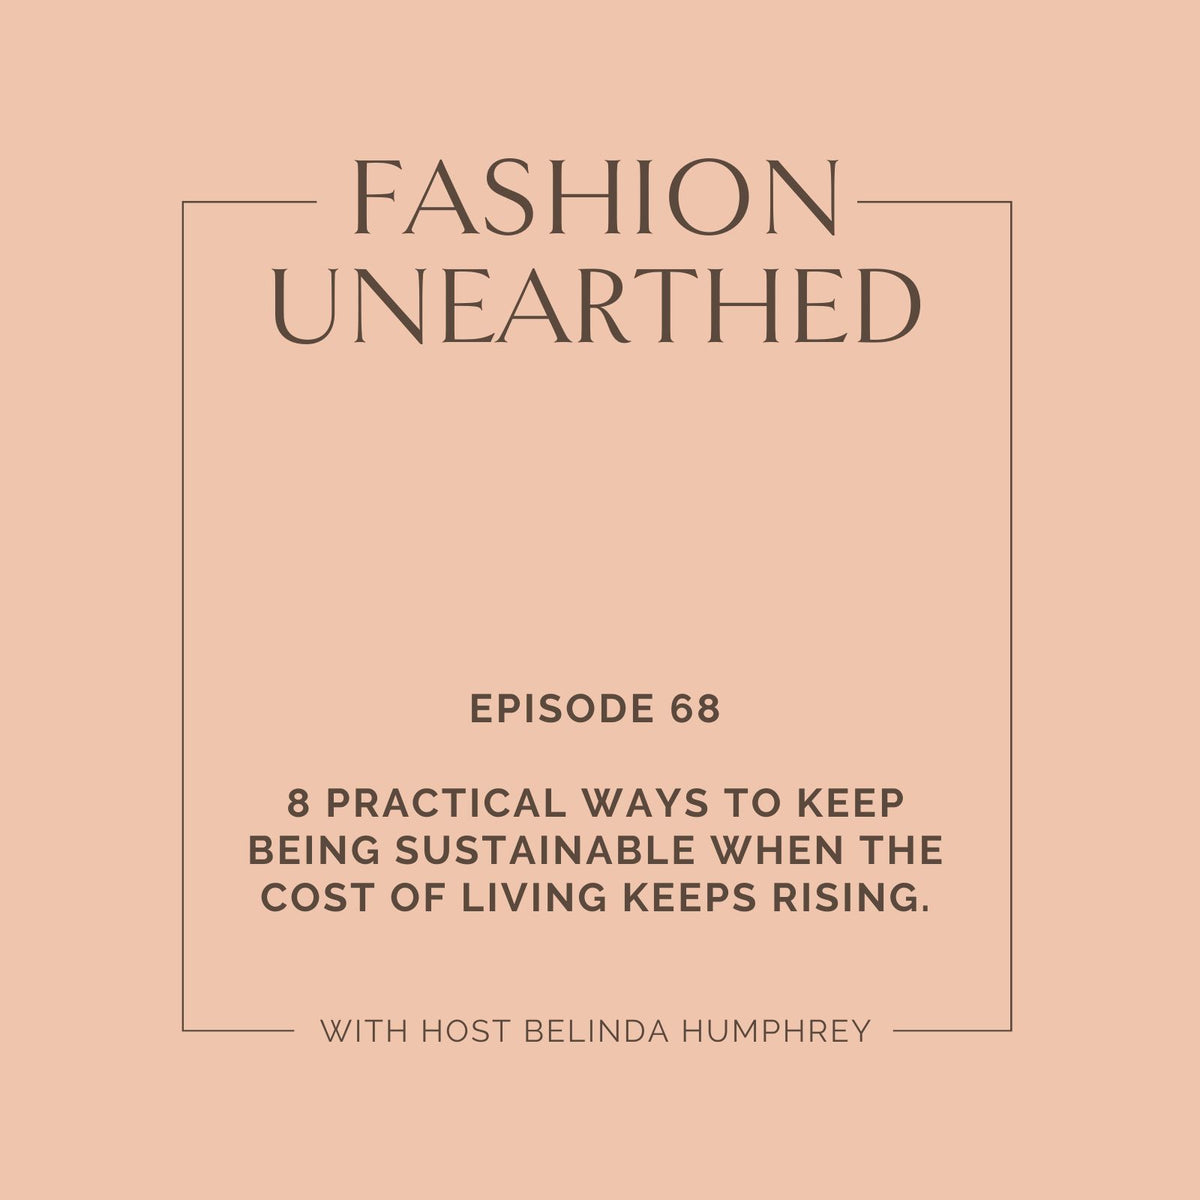 EPISODE 68: 8 practical ways to keep being sustainable when the cost of living keeps rising.